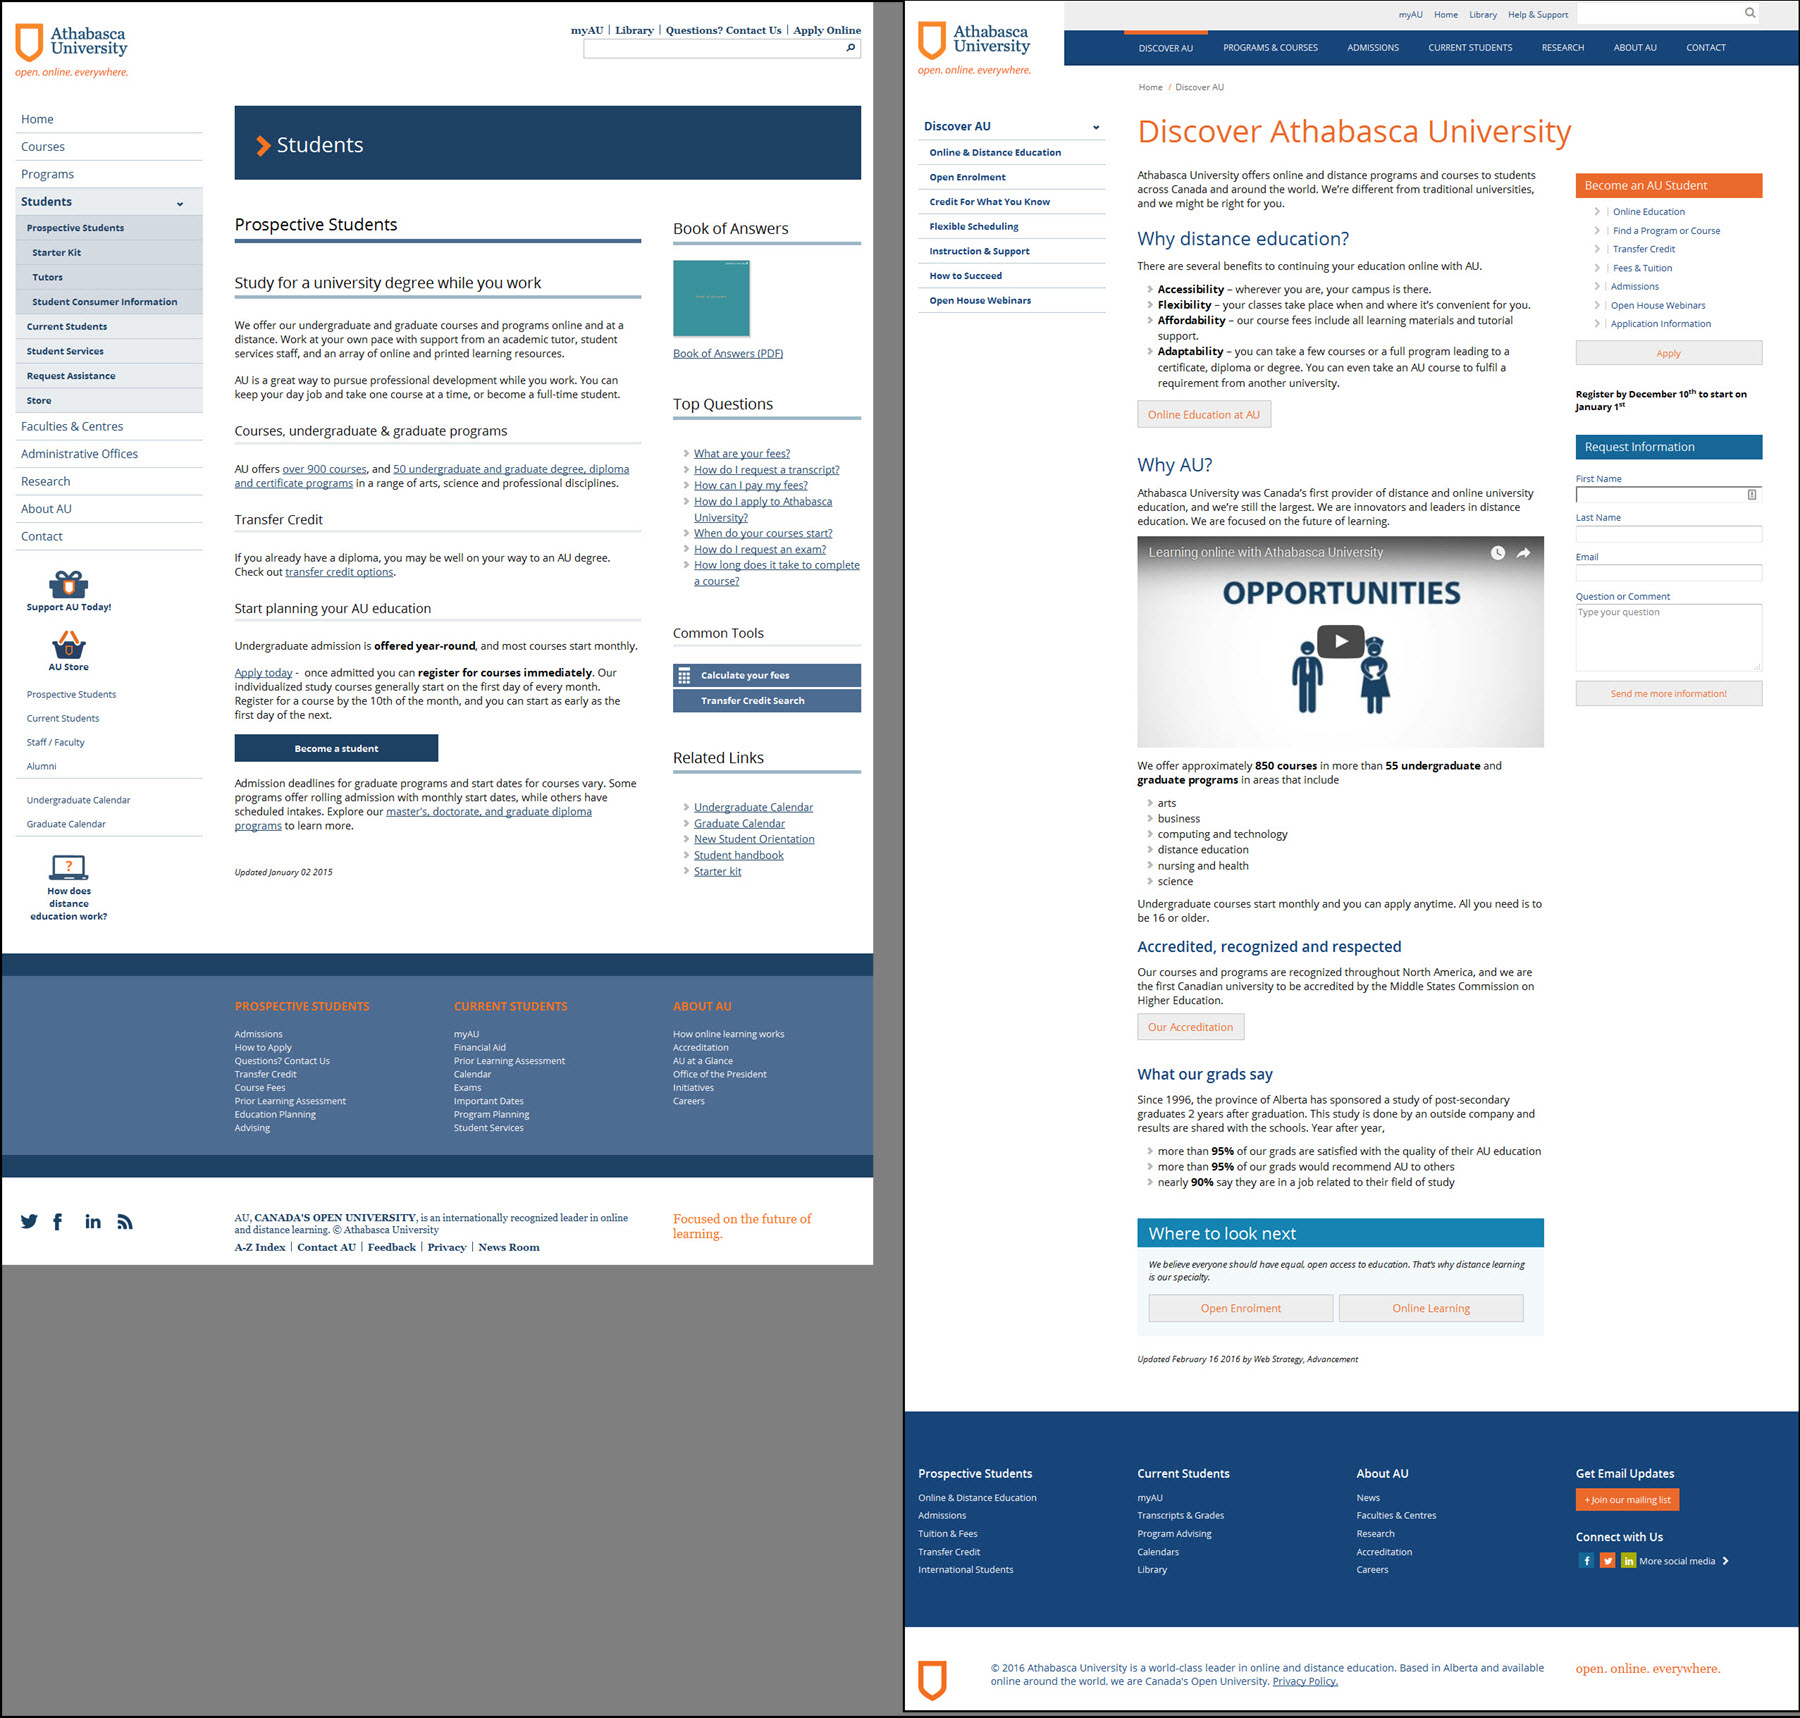 Comparison of original and revised versions of Athabasca University's prospective students landing page